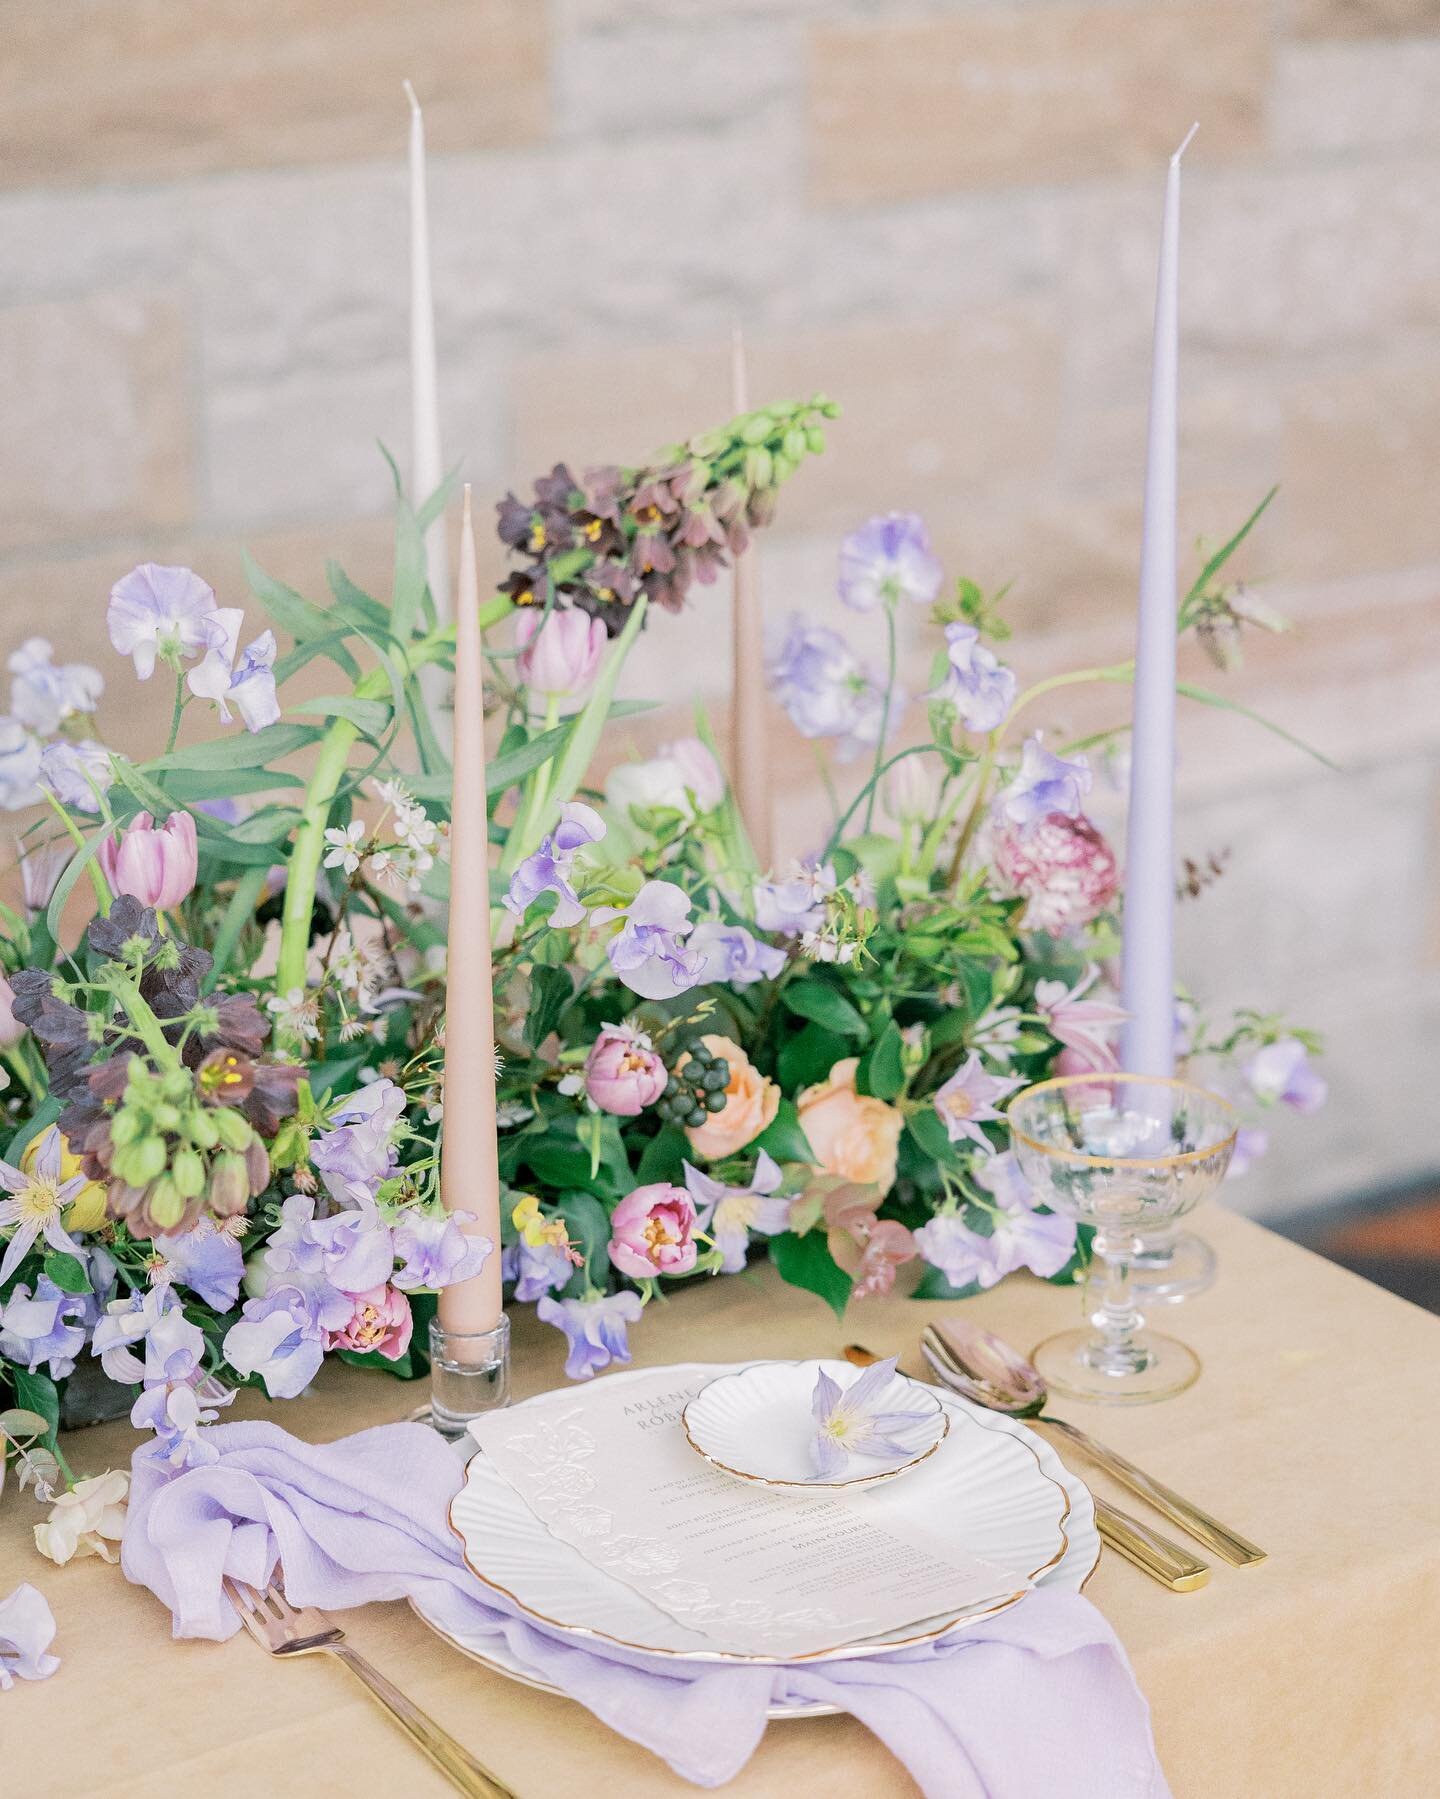 Floral table meadow 🕊

Venue: @castleleslie 
Planning, Photography &amp; videography: @wonderandmagicie 
Planning &amp; Styling: @infusionweddings 
Florals: @paradeflowers &amp; @fleurweddings 
Stationery and Signage: @calligraphybylaura 
Vintage Re